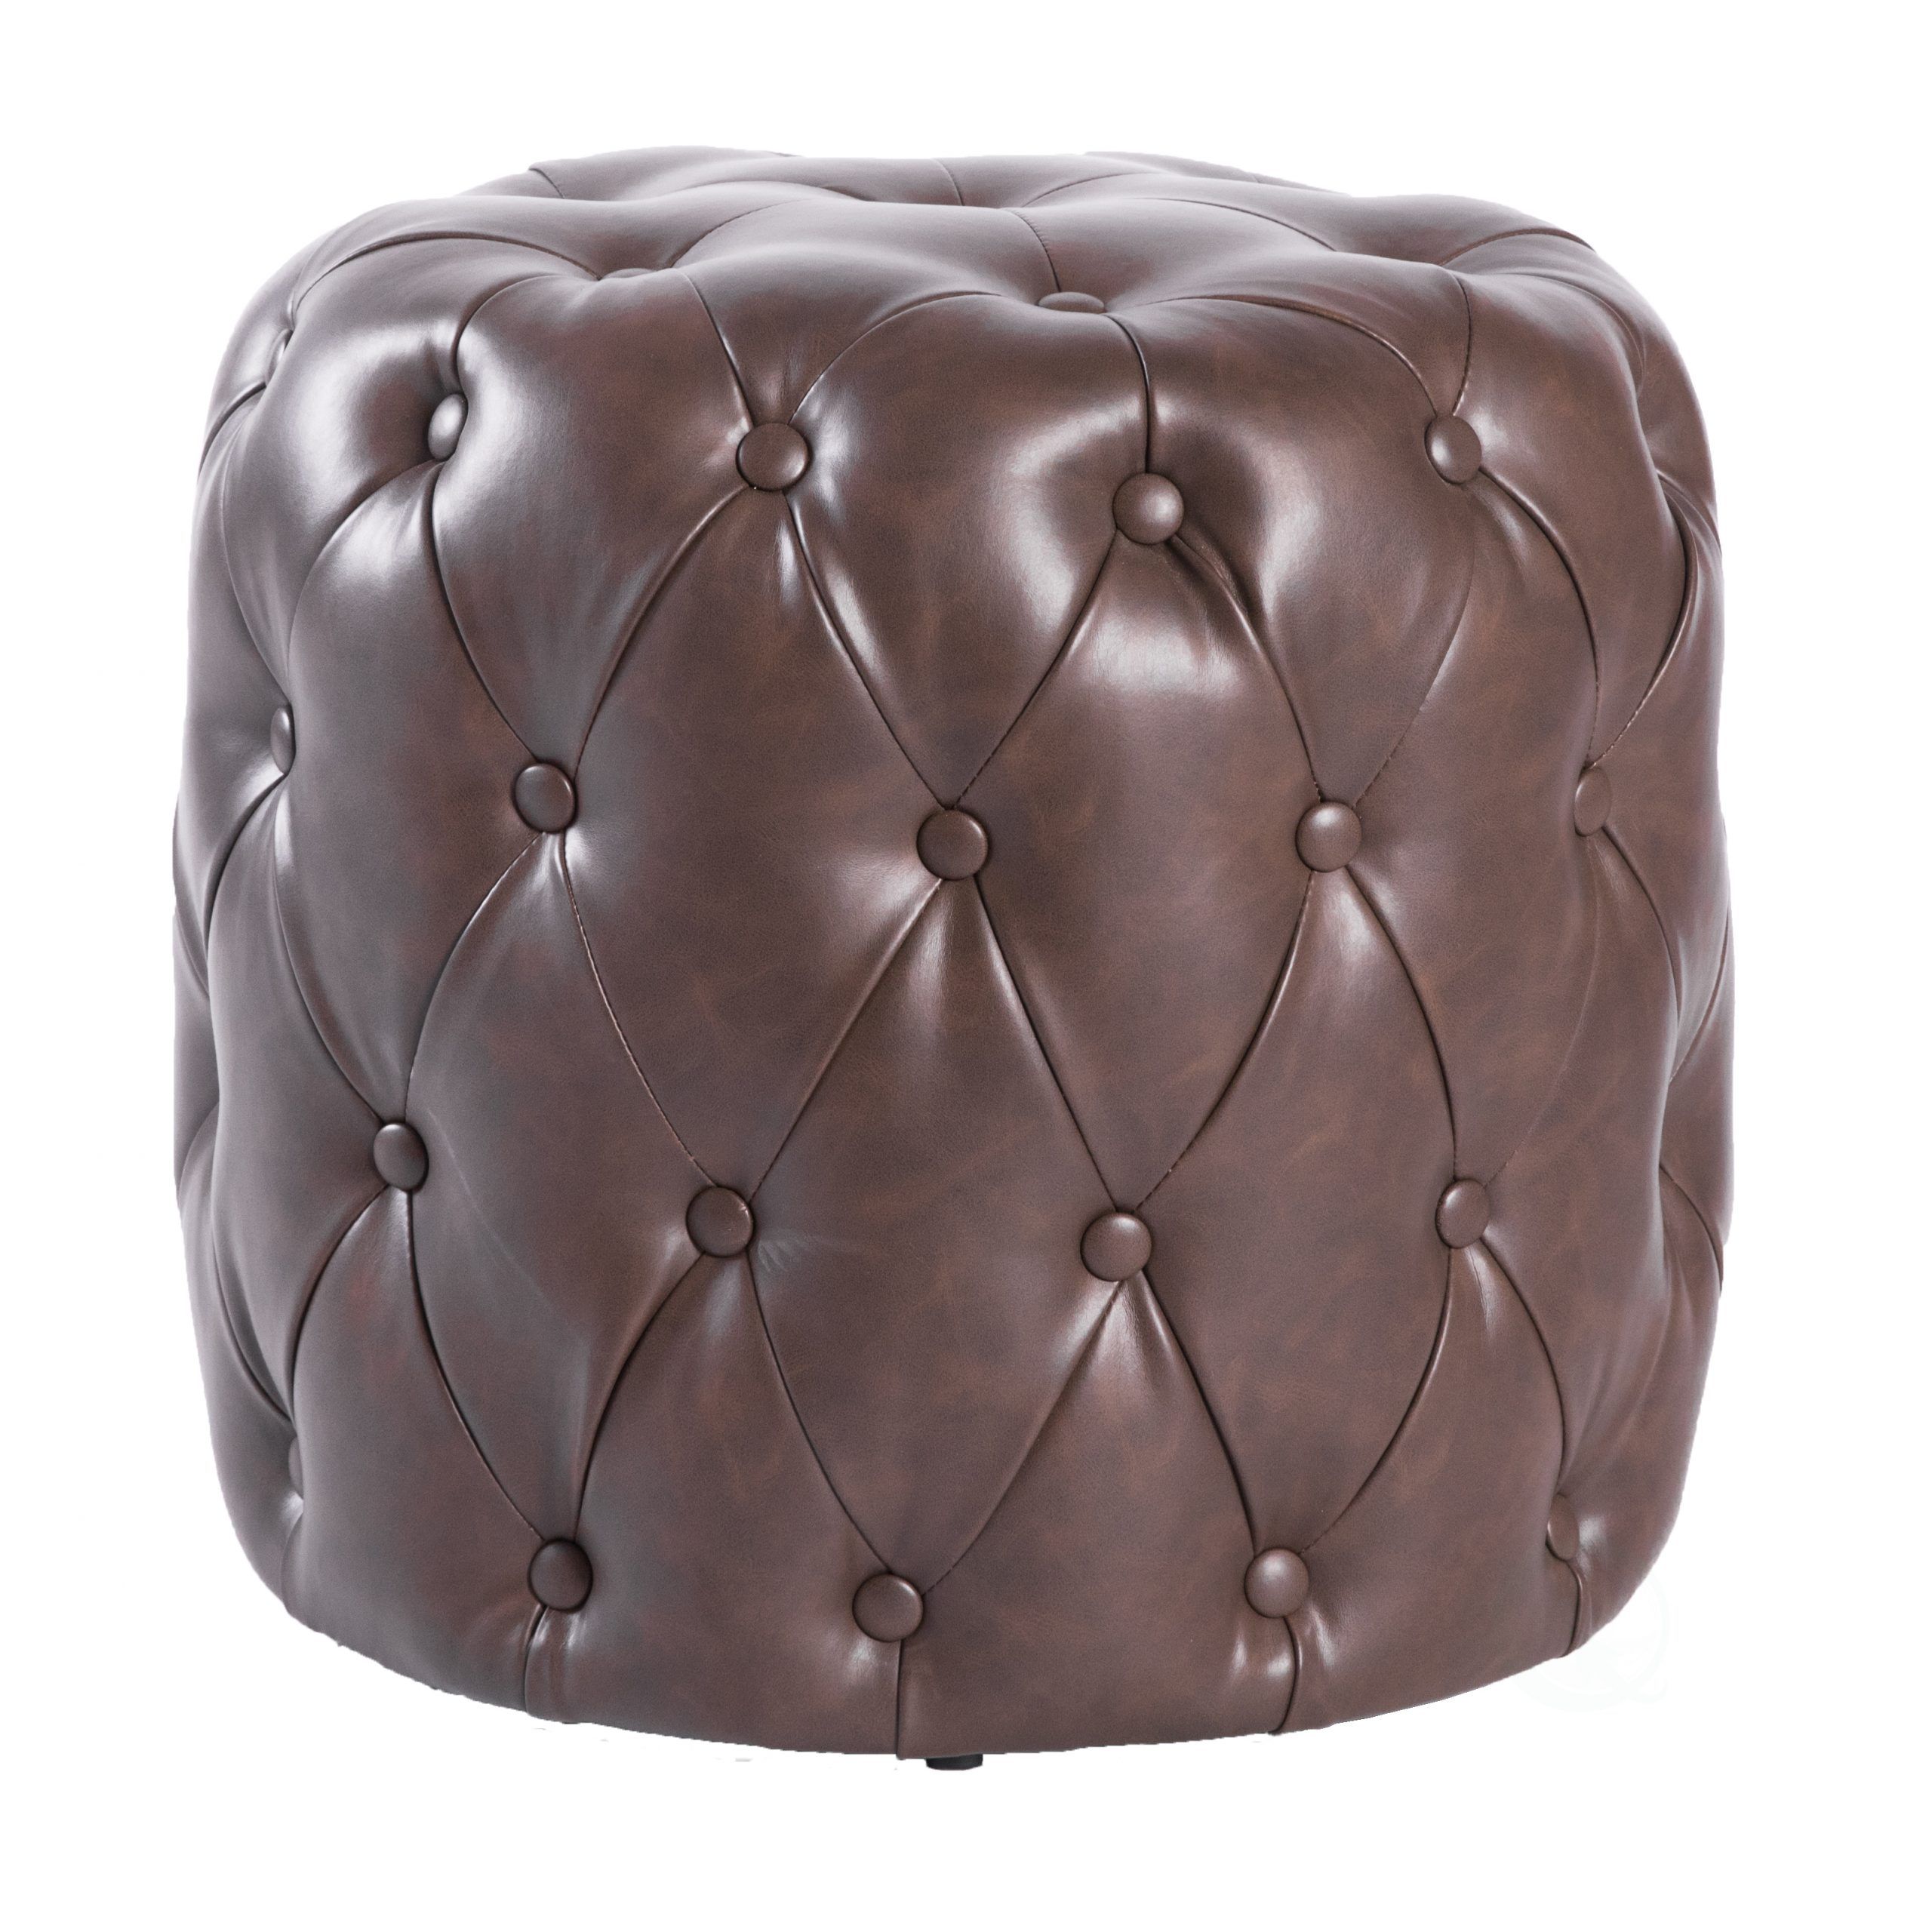 New Bold Tones Tufted Modern Leather Round Ottoman Stool, Brown | Ebay With Regard To Round Gold Faux Leather Ottomans With Pull Tab (View 9 of 20)